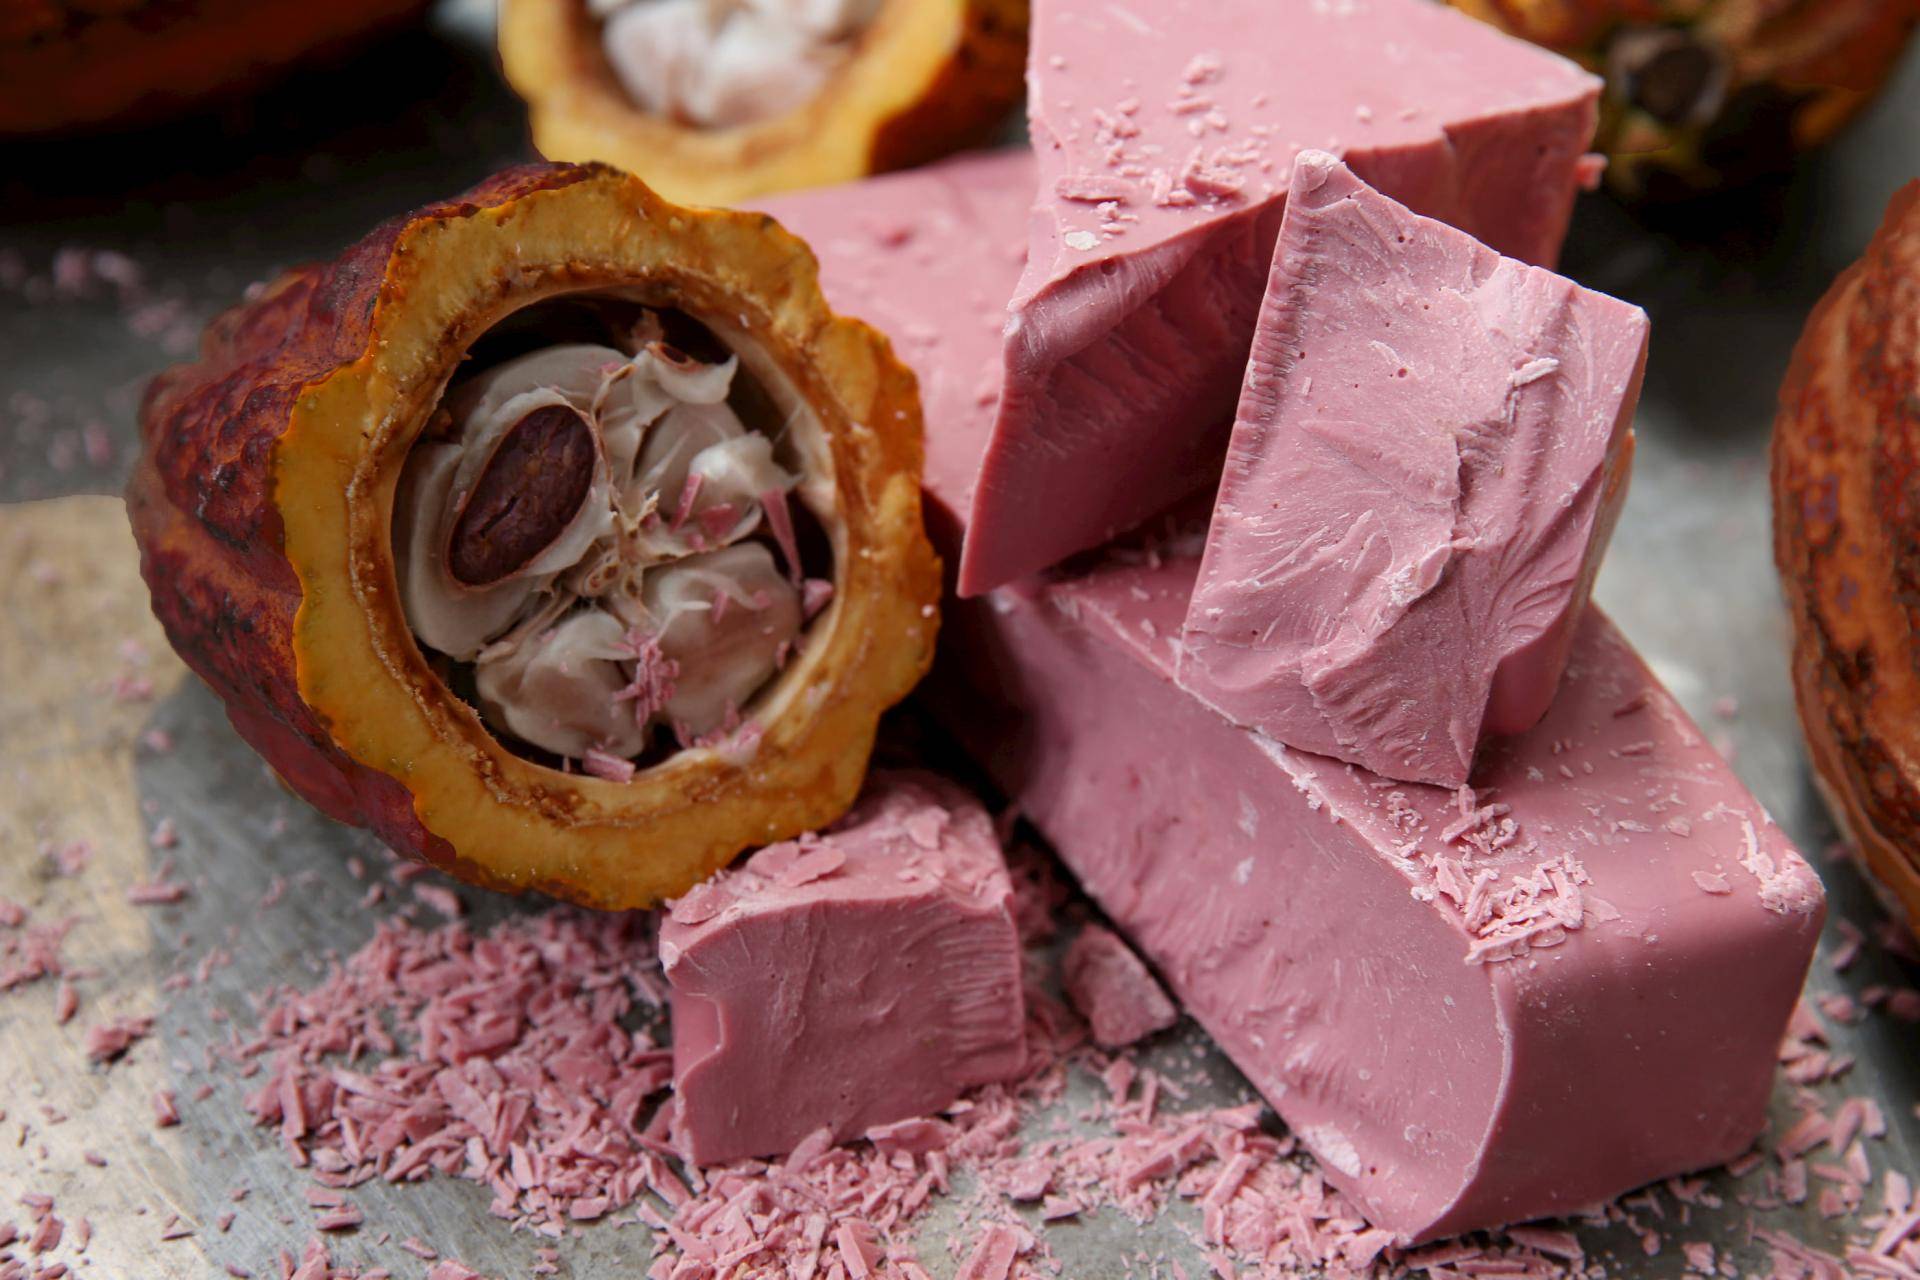 FDA advances Barry Callebaut's Ruby as the fourth type of chocolate after Dark, Milk and White